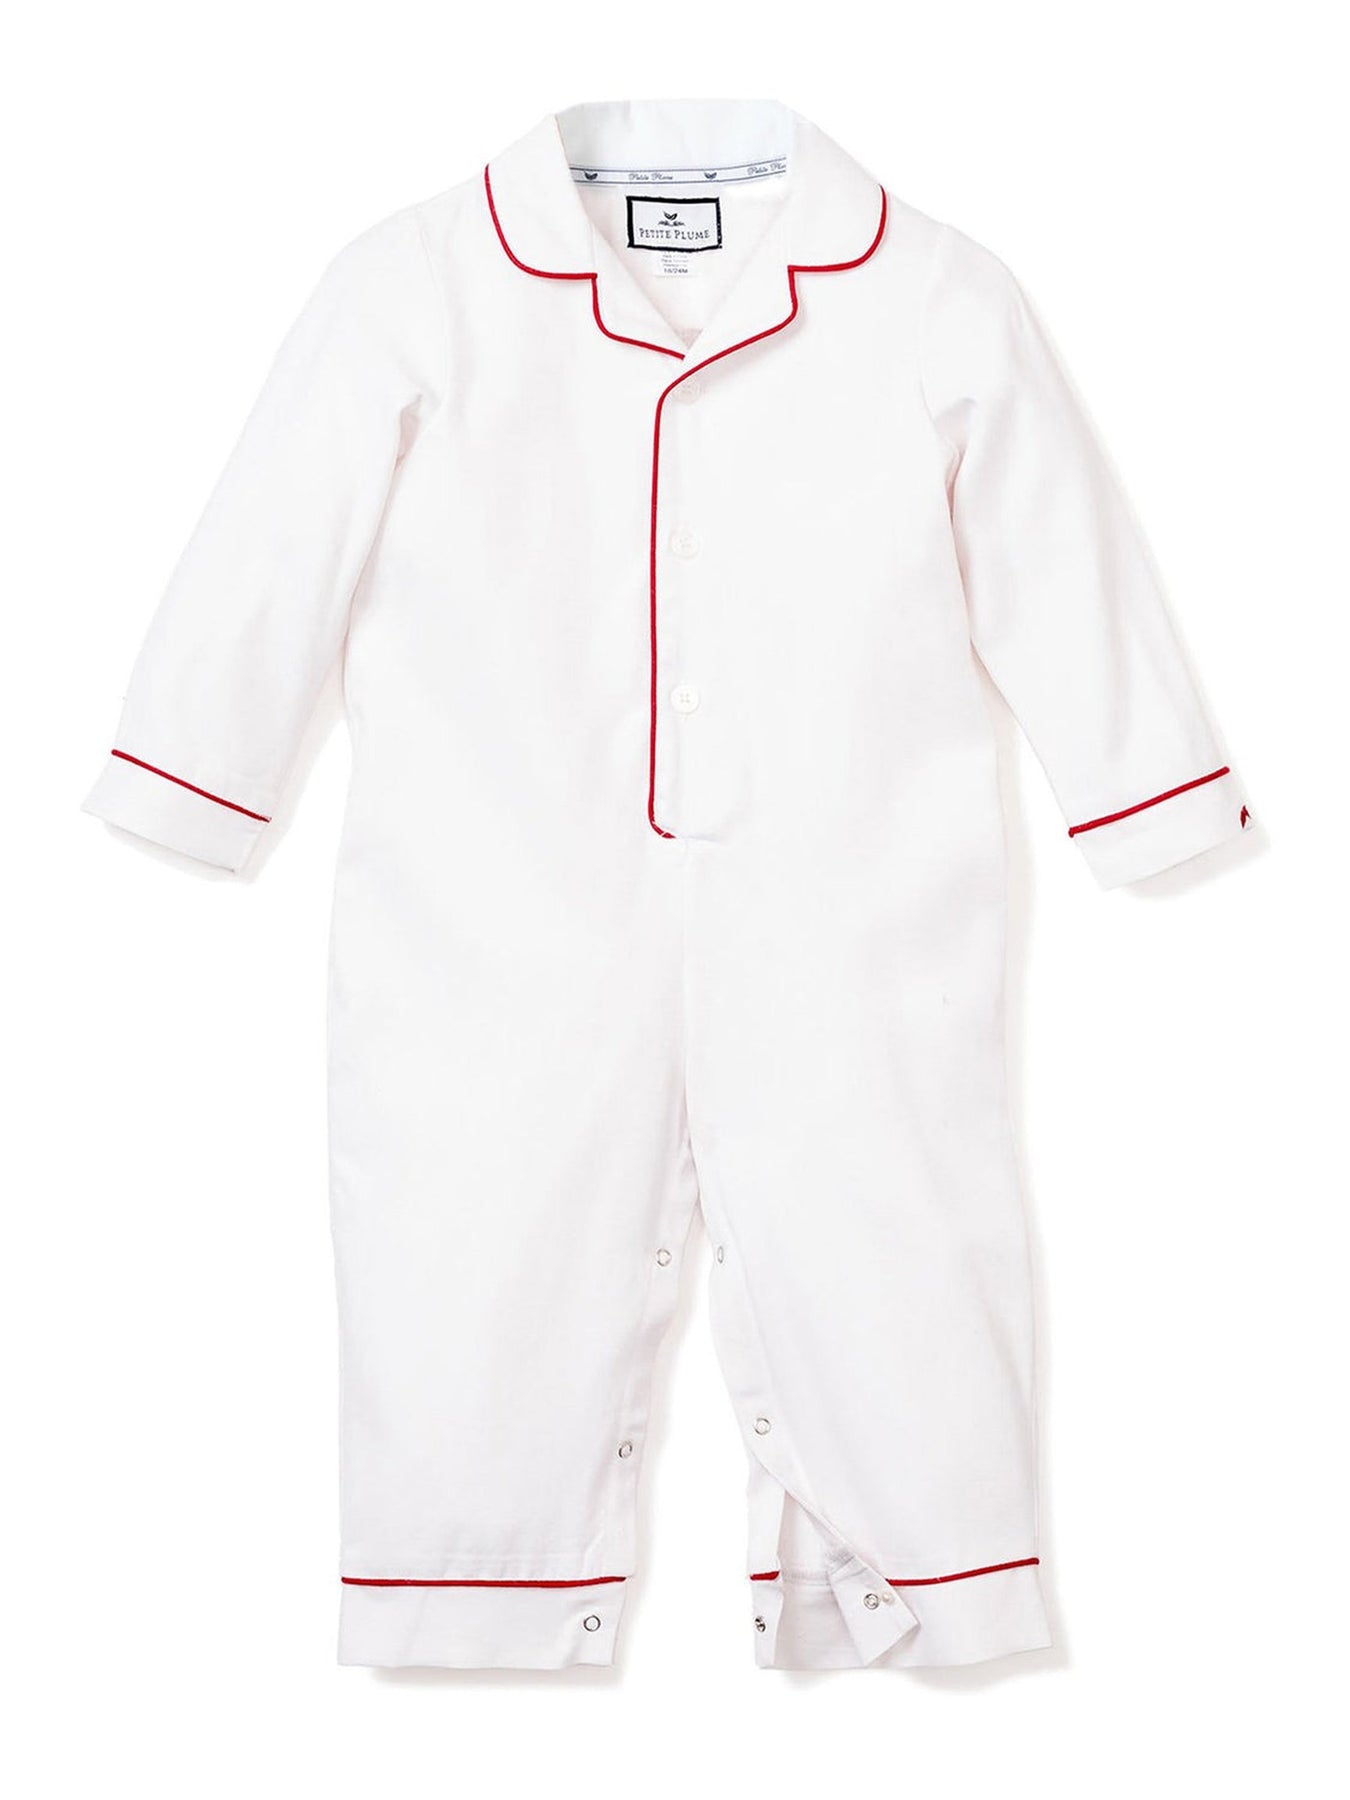 White Romper with Red Piping | Posh Tots Children's Boutique